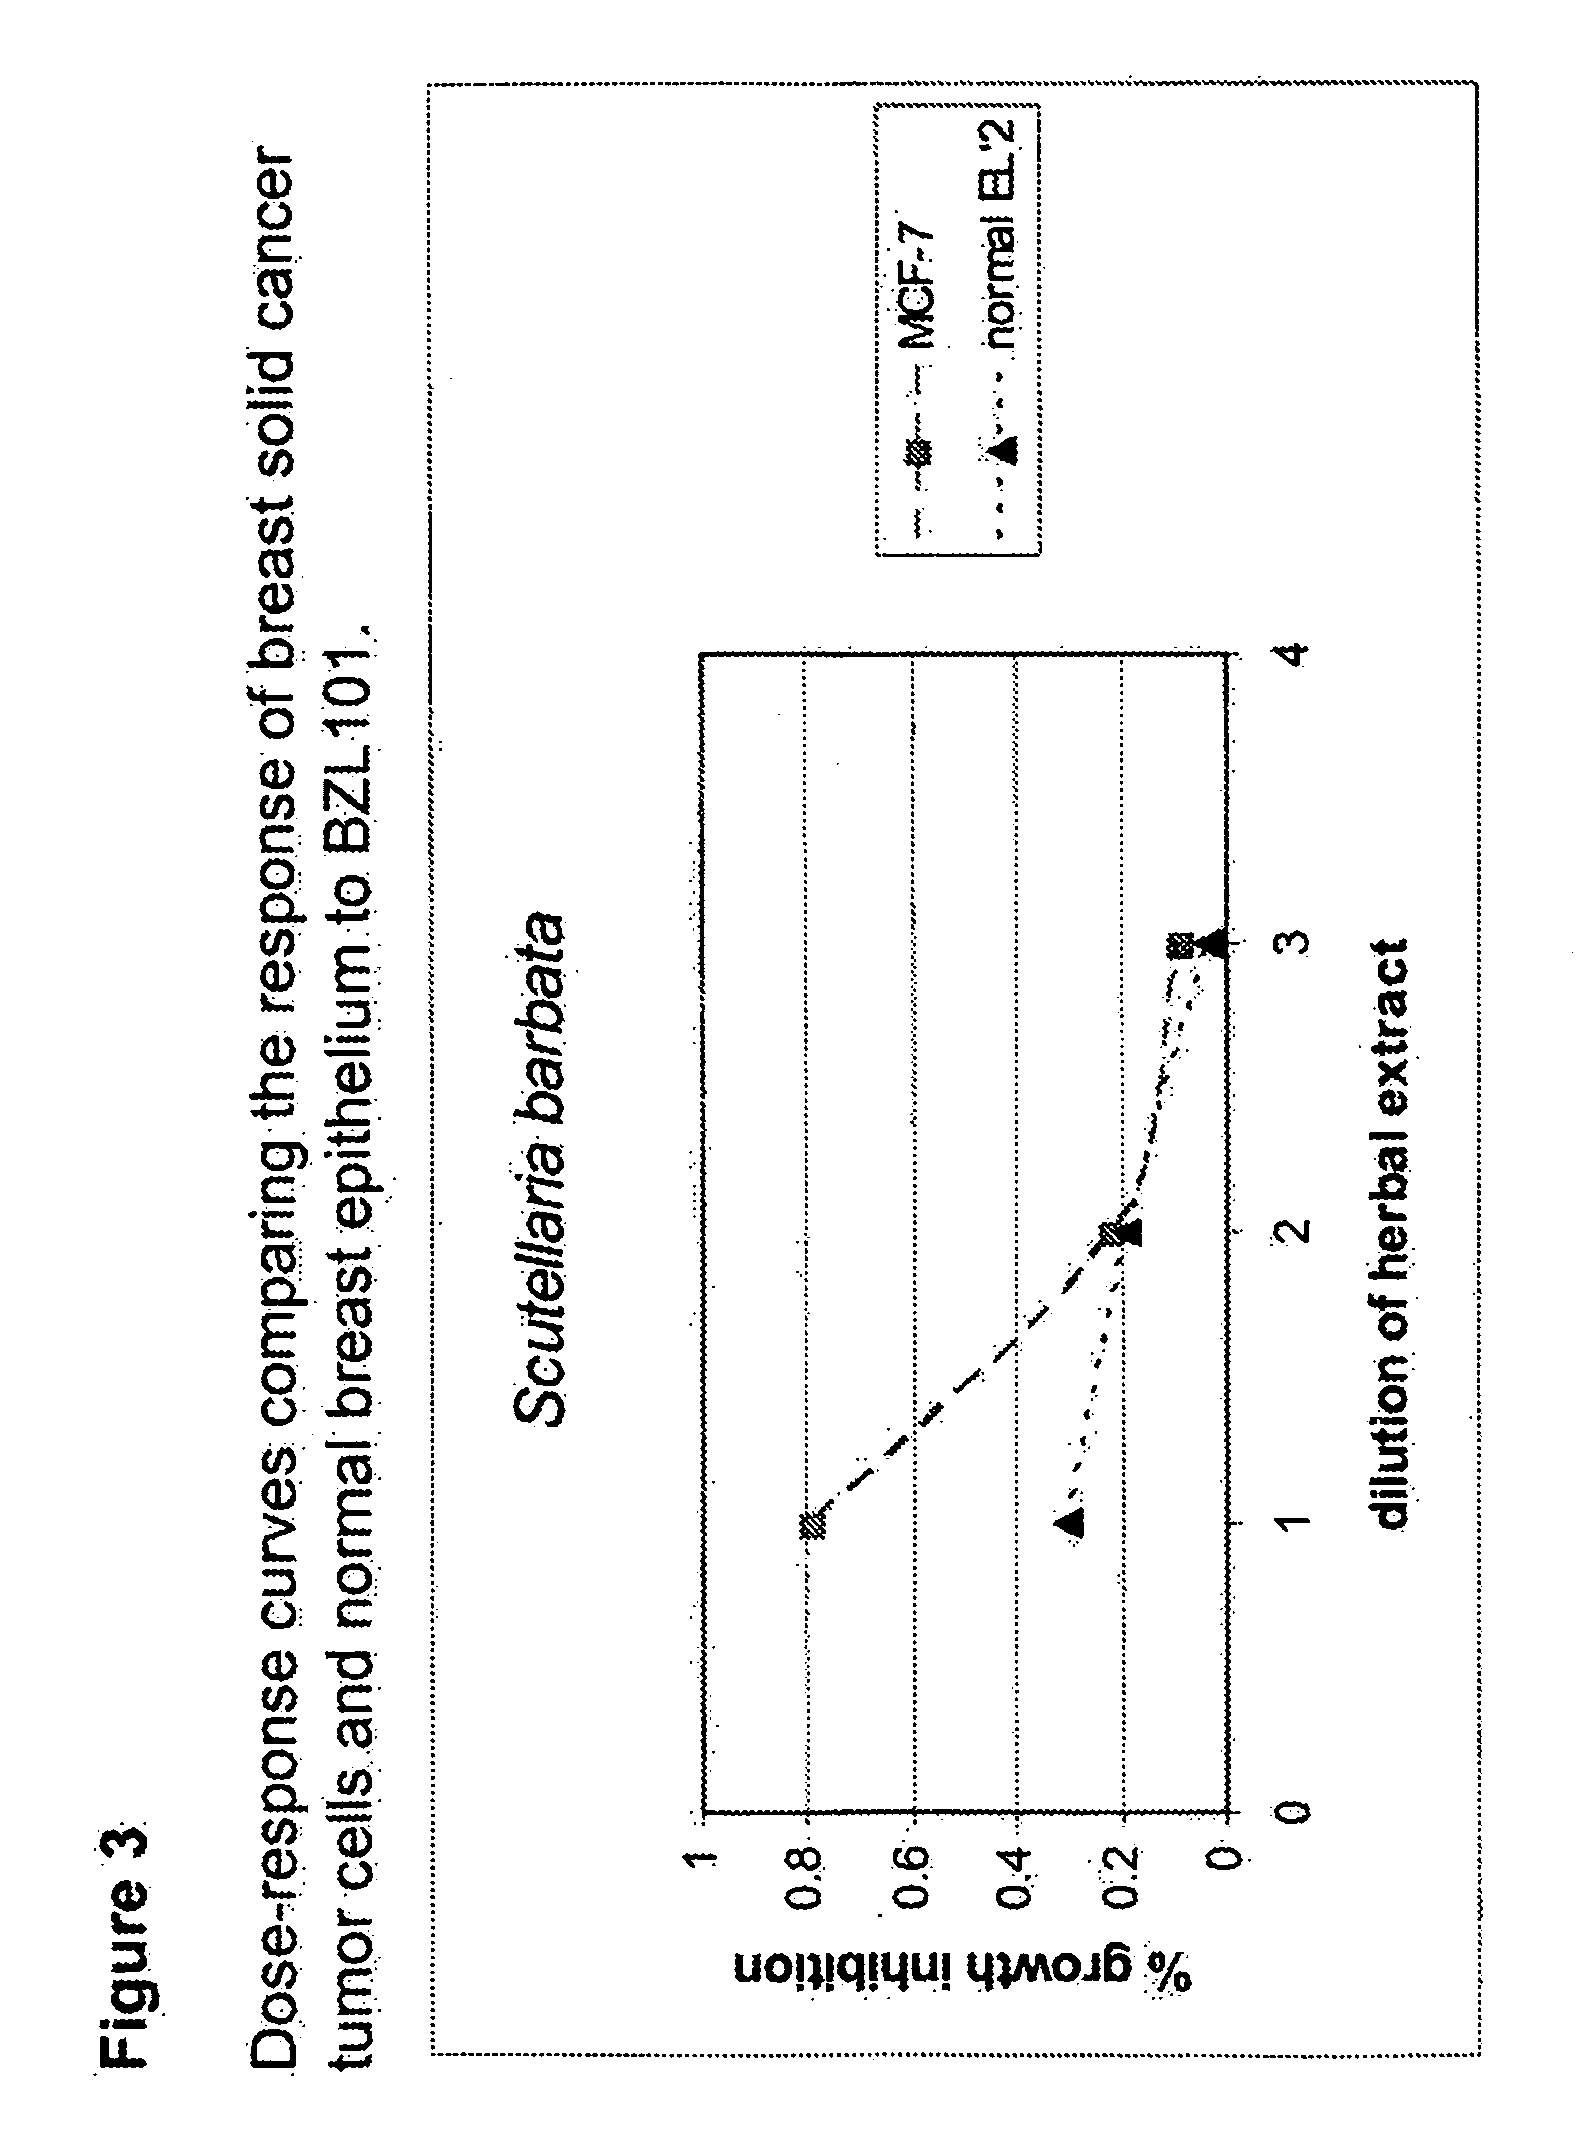 Methods of detecting and treatment of cancers using scutellaria barbata extract